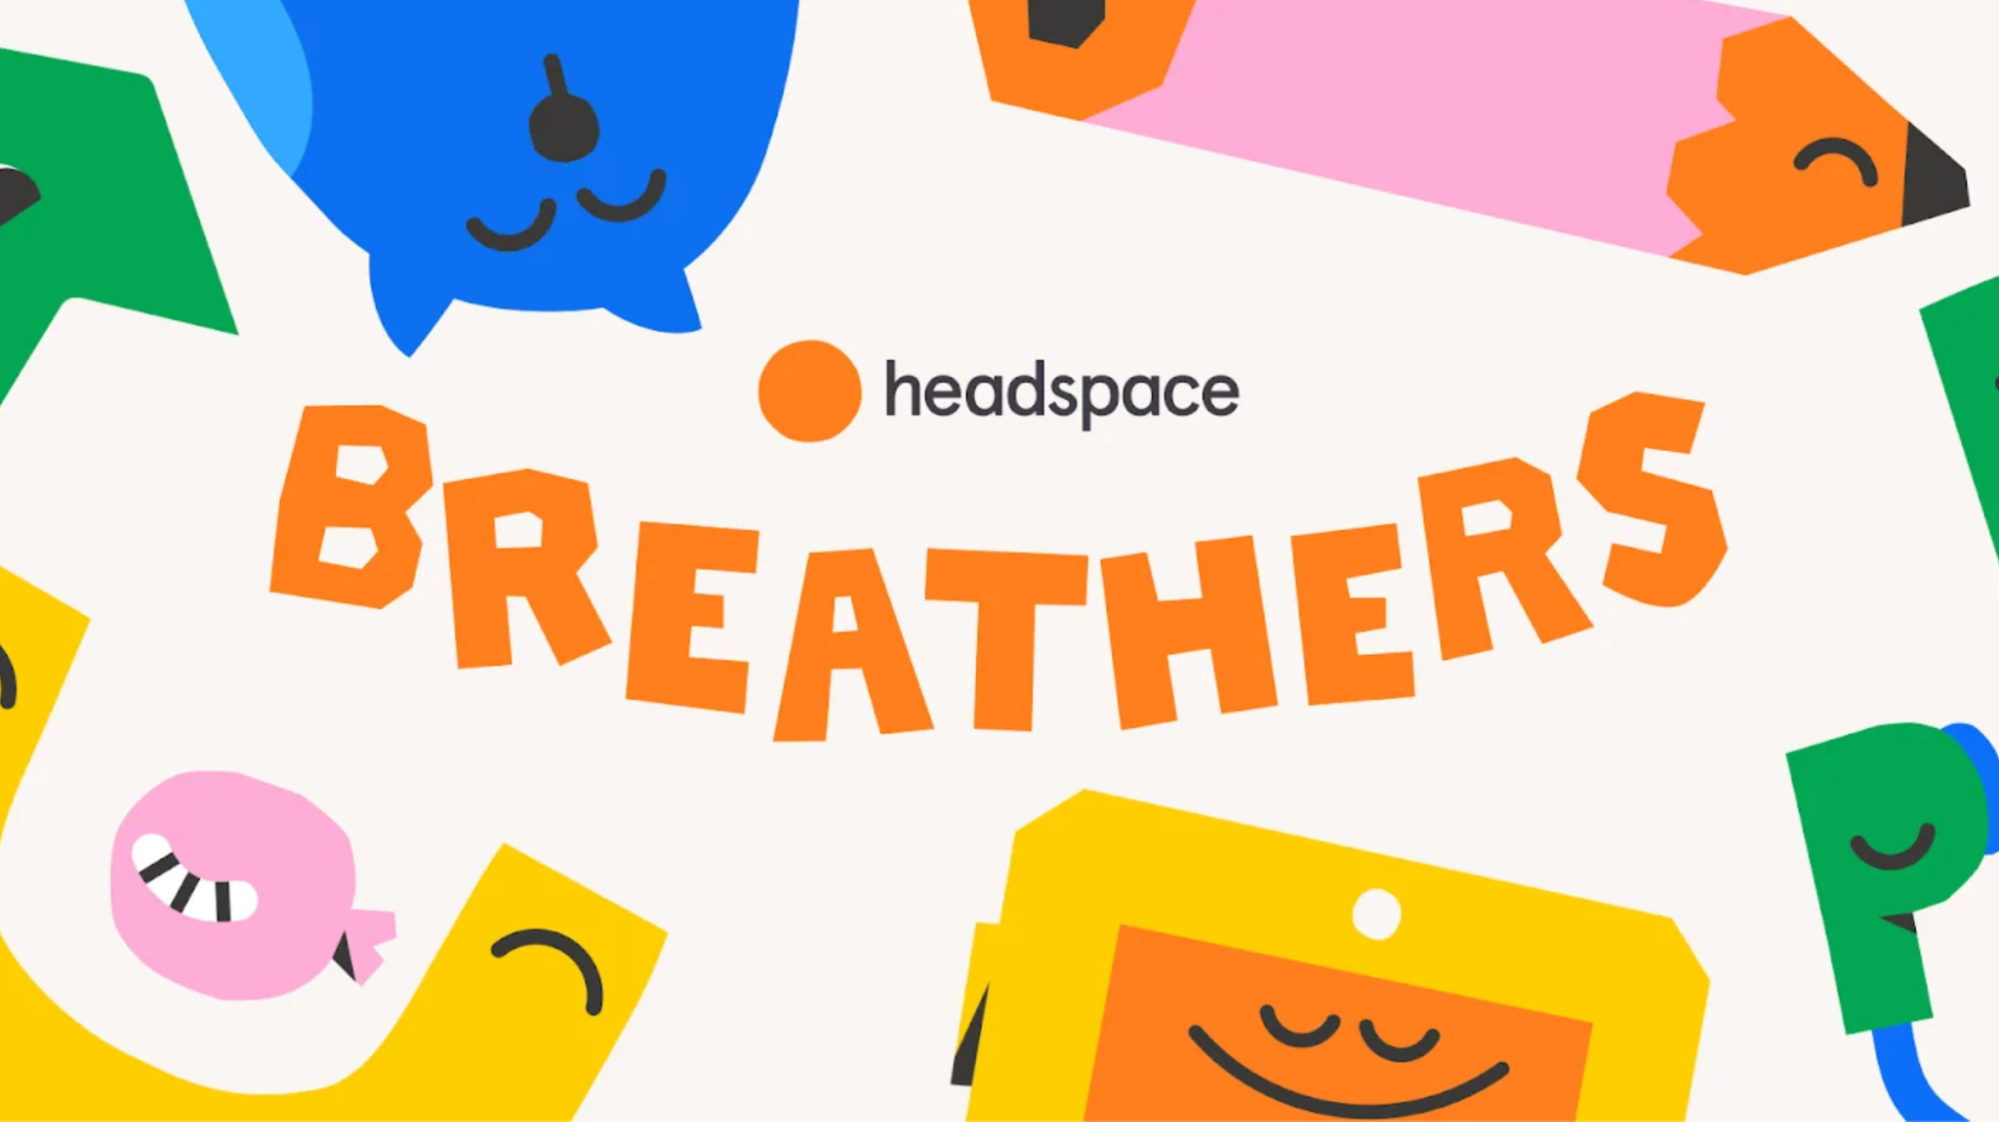 breathers by headspace